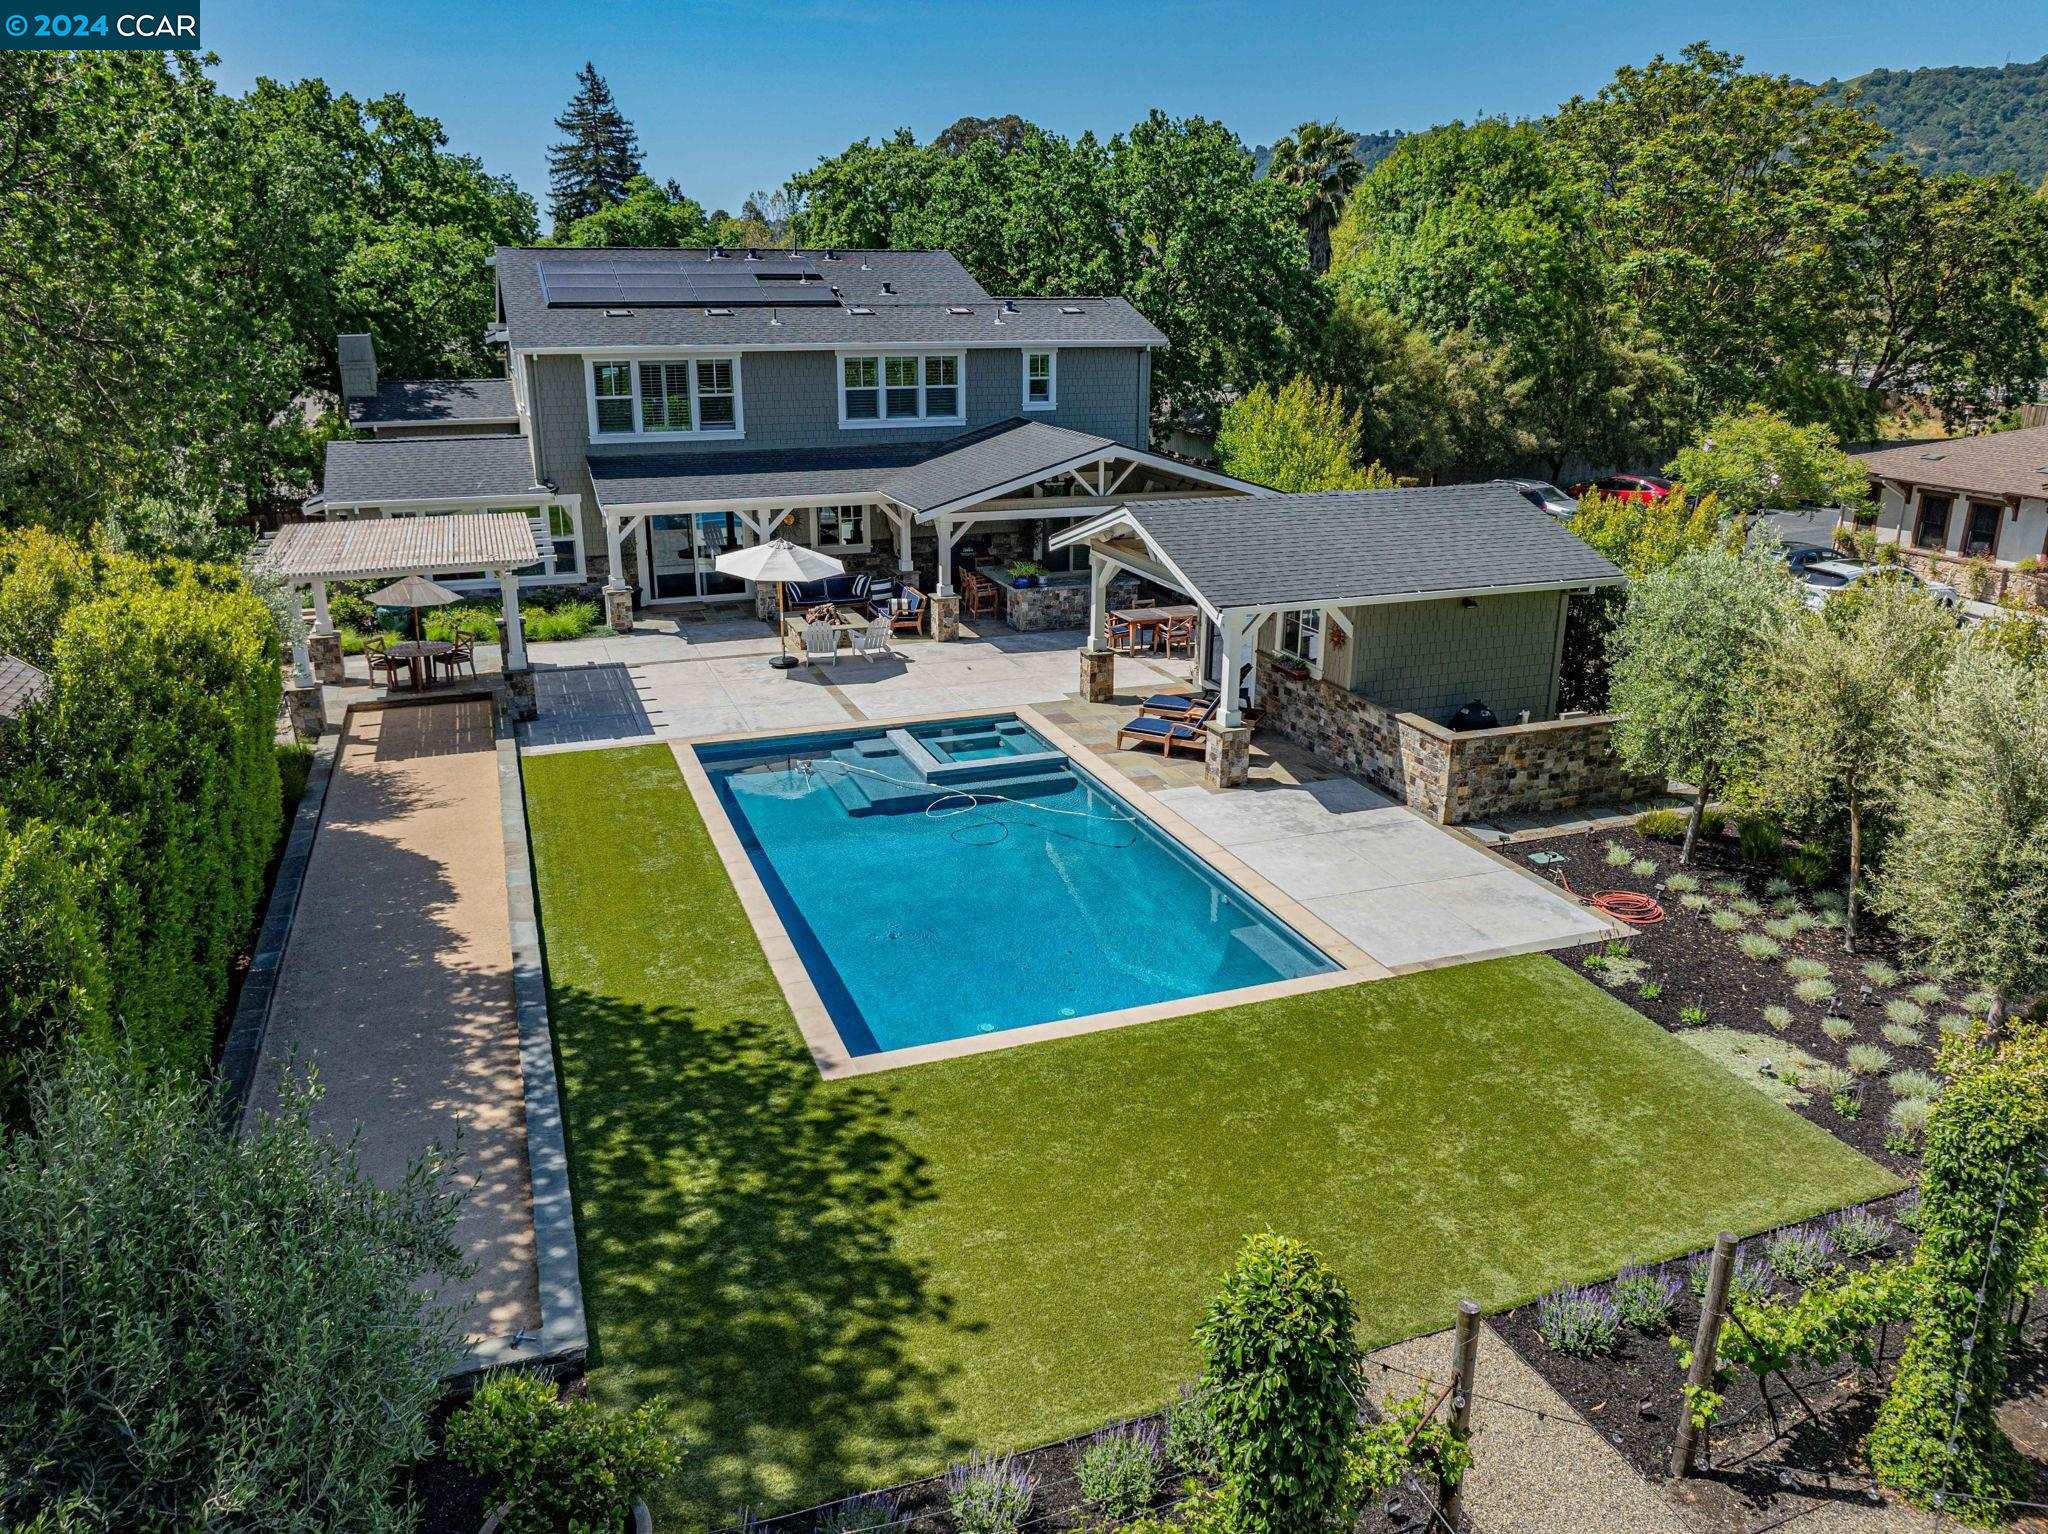 an aerial view of a house with swimming pool garden and patio